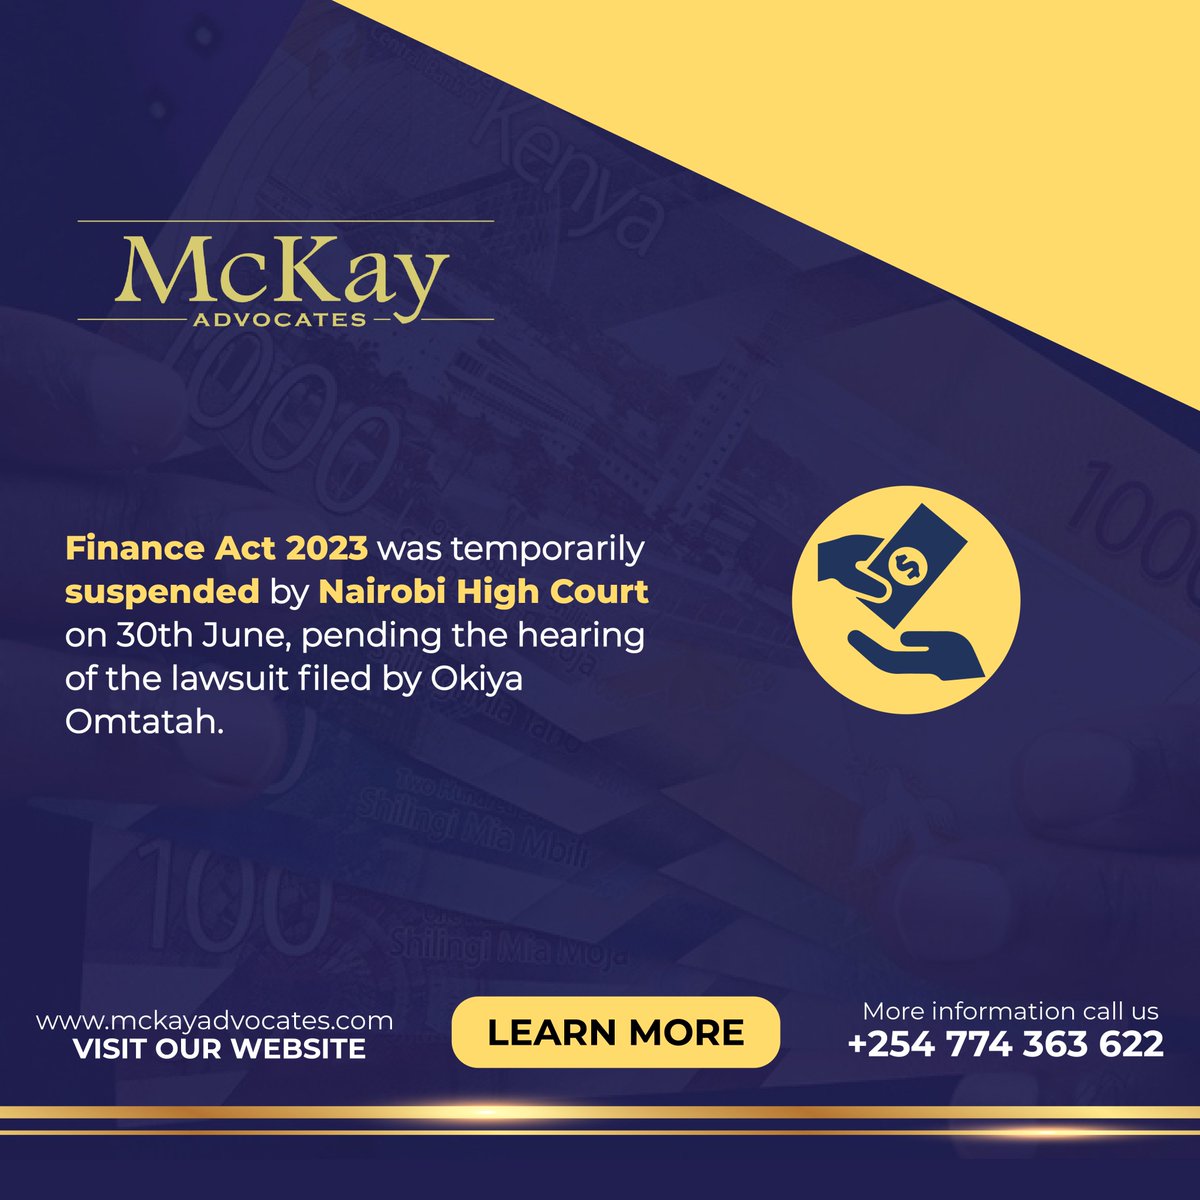 Twitter: Finance Act 2023 was temporarily suspended by Nairobi High Court on 30th June, pending the hearing of the lawsuit filed by Okiya Omtatah. Learn more about some of the proposed changes.mckayadvocates.com/post/the-finan… #FinanceAct #LegalNew